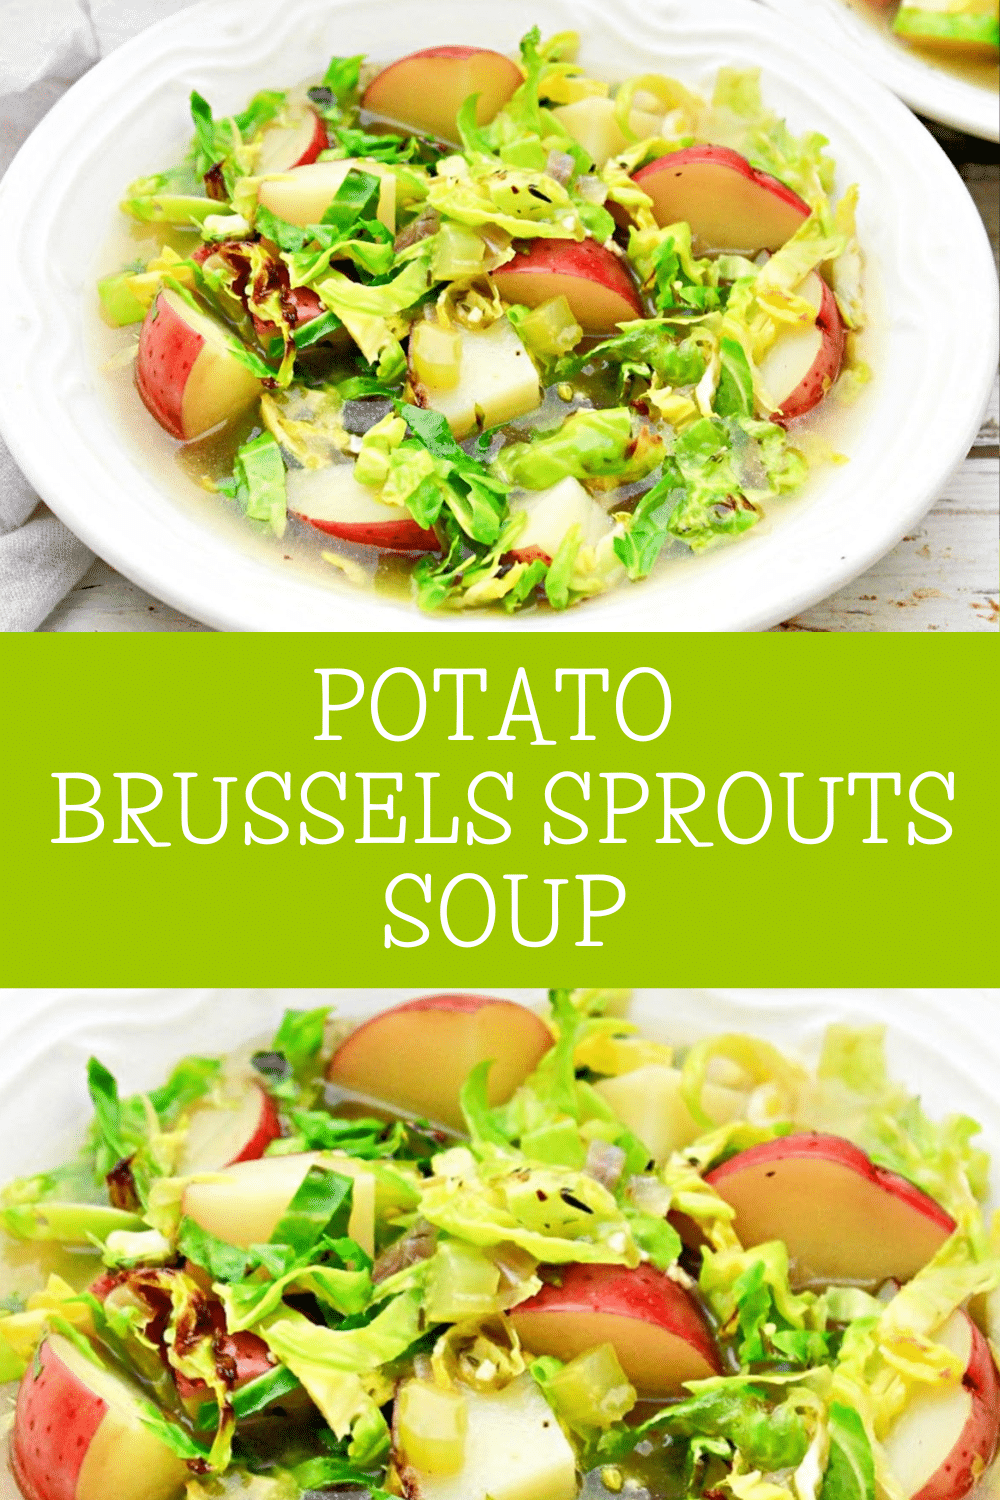 Potato and Brussels Sprouts Soup ~ Chunky red potatoes and shredded Brussels sprouts in a savory, herb-infused broth. Simple and satisfying! via @thiswifecooks